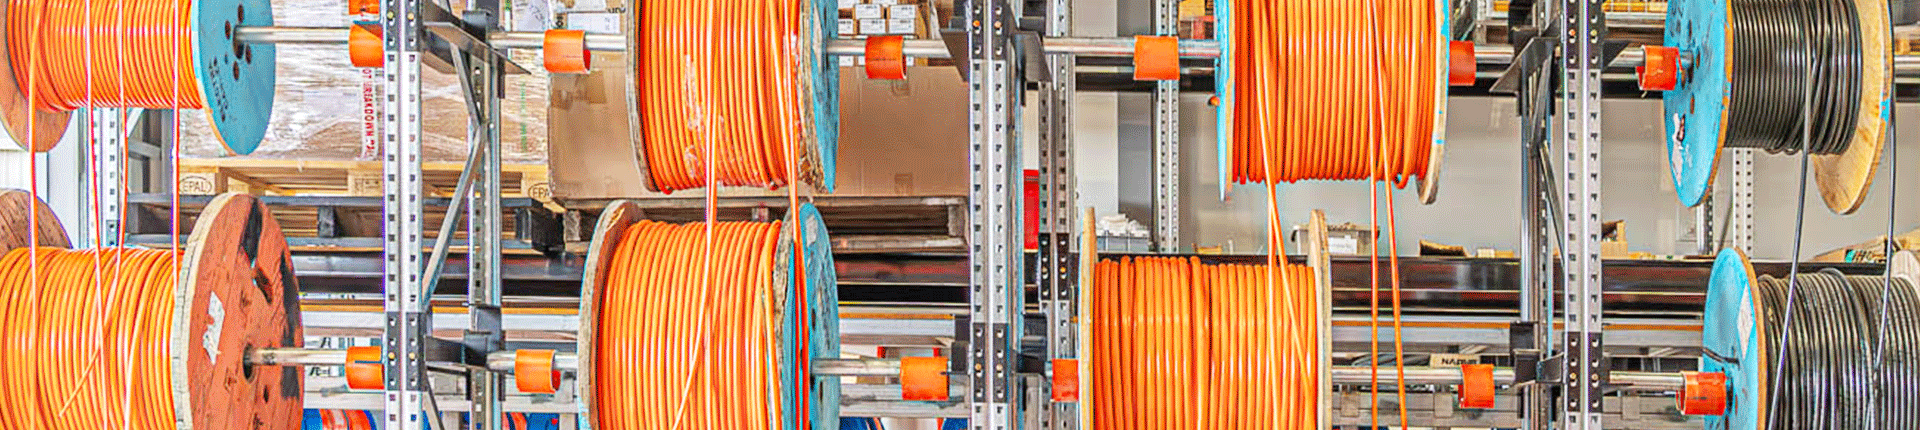 Cable Racking Main Image